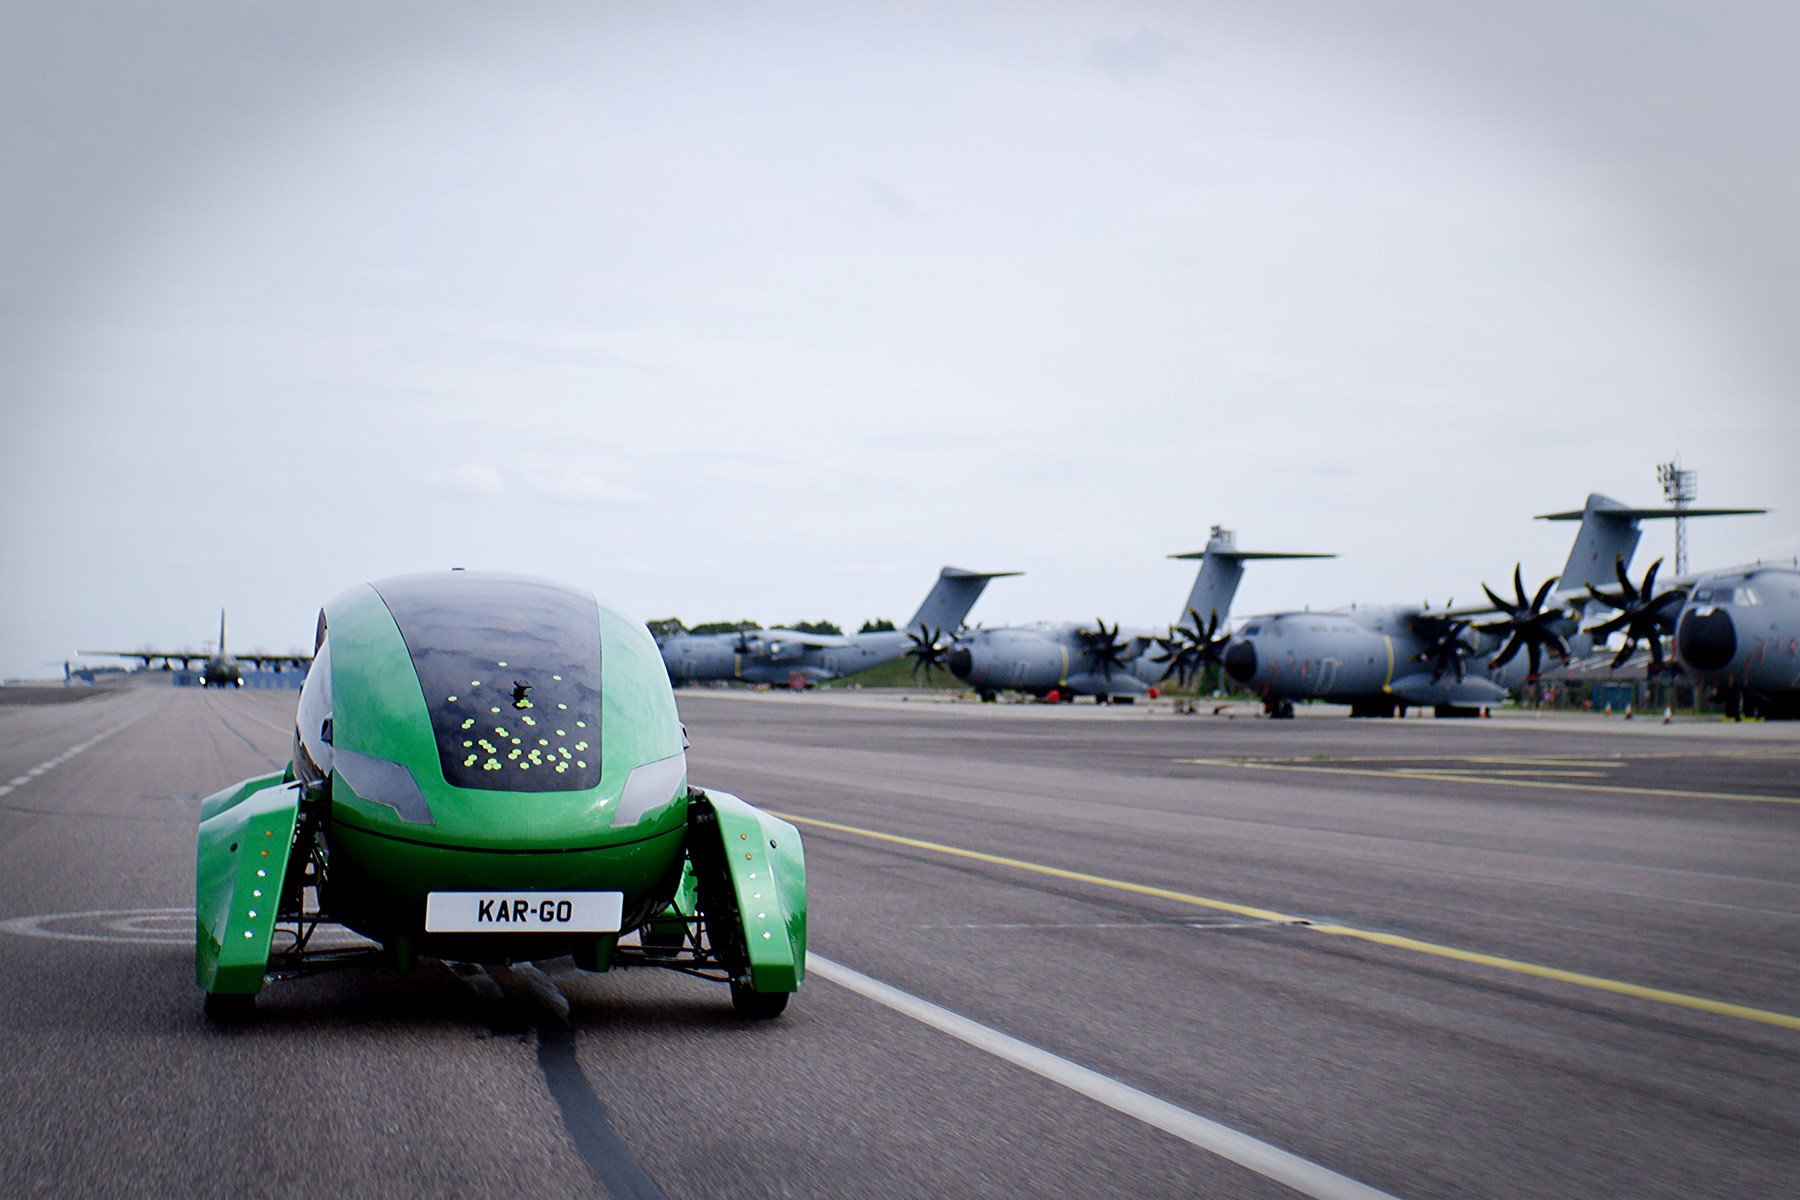 Robot car on the airfield, with Atlas Aircraft lined up.